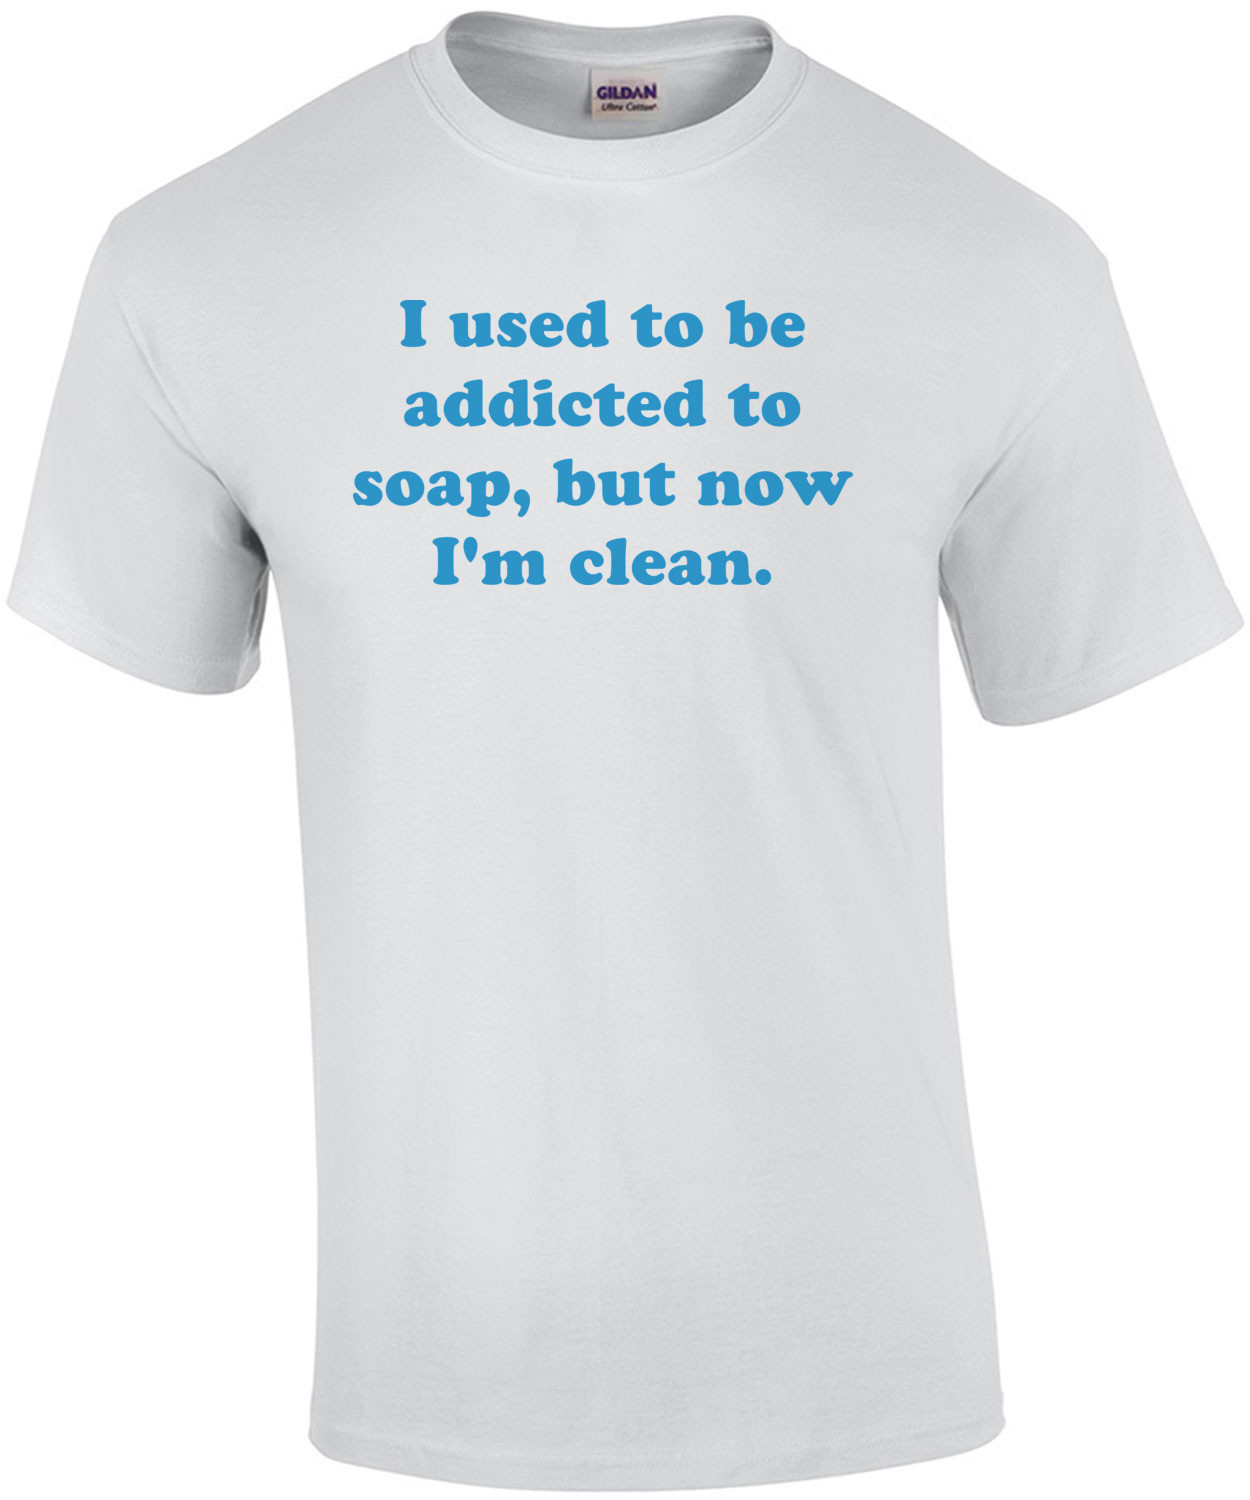 I used to be addicted to soap, but now I'm clean. Shirt